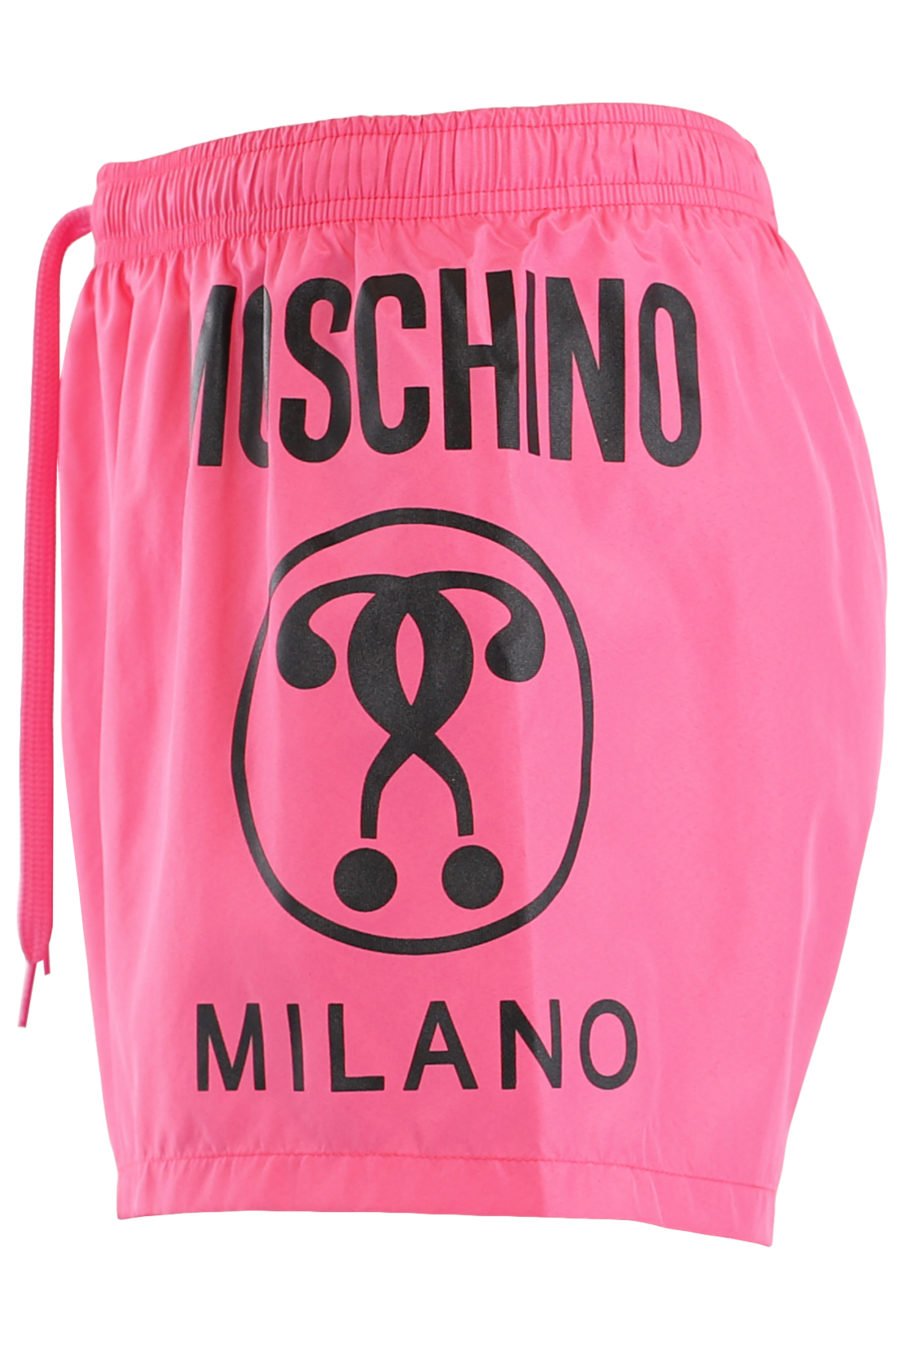 Fuchsia swimming costume with black logo double side question - IMG 9485